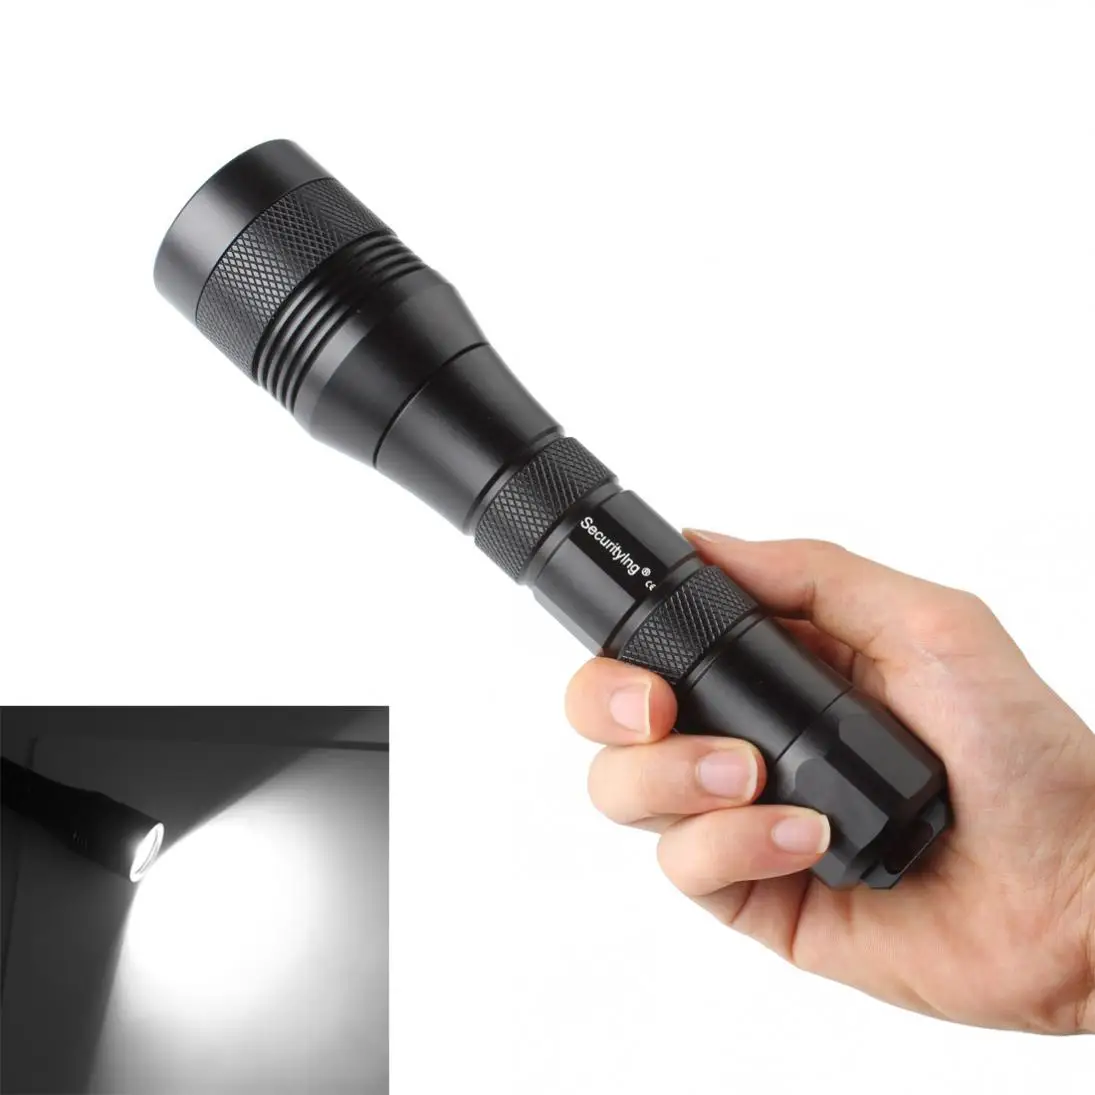 

SecurityIng 1050Lm XM-L2(U4) LED Underwater Torch Wide 120 Degrees Beam Angle Scuba Diving Photography Video Flashlight